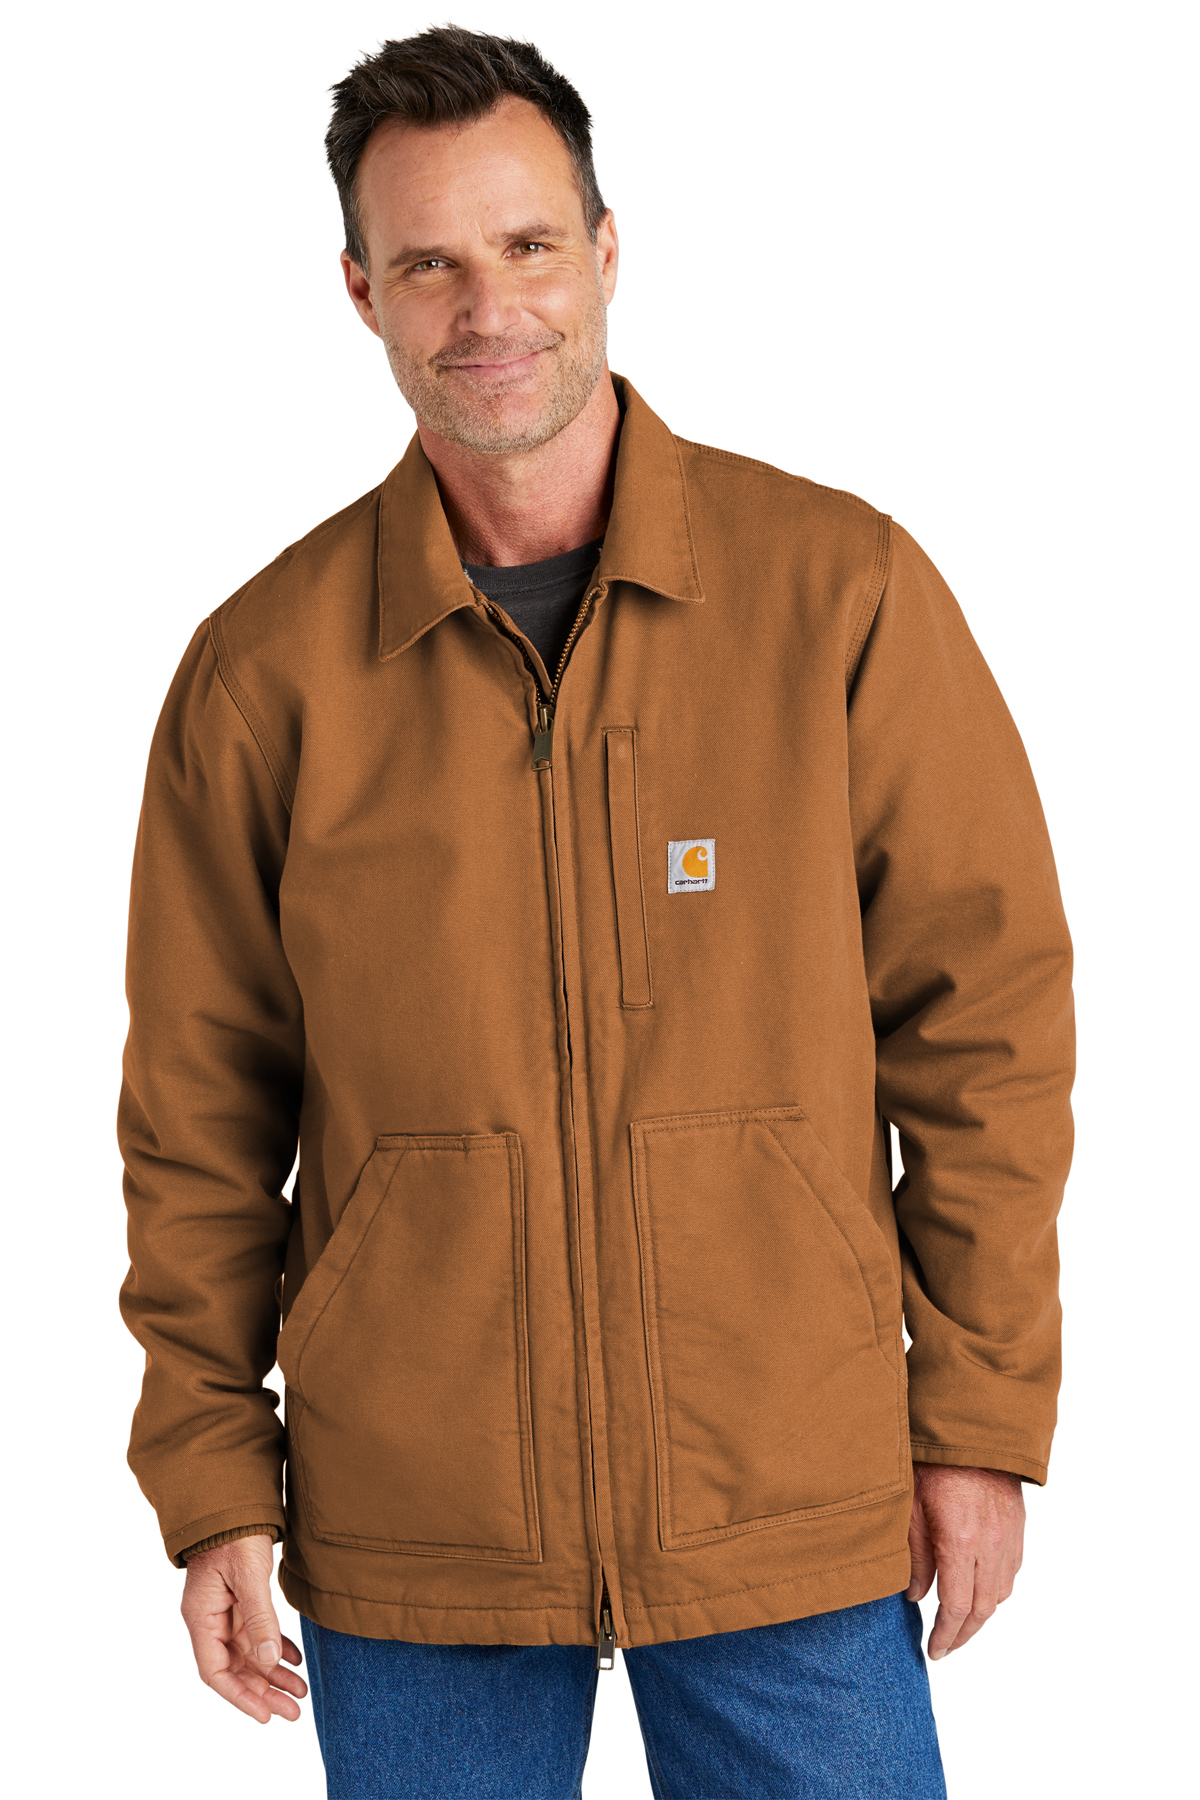 CARHARTT BROWN CANVAS 100% COTTON DUCK 14 OZ FR FABRIC BY THE 1/2